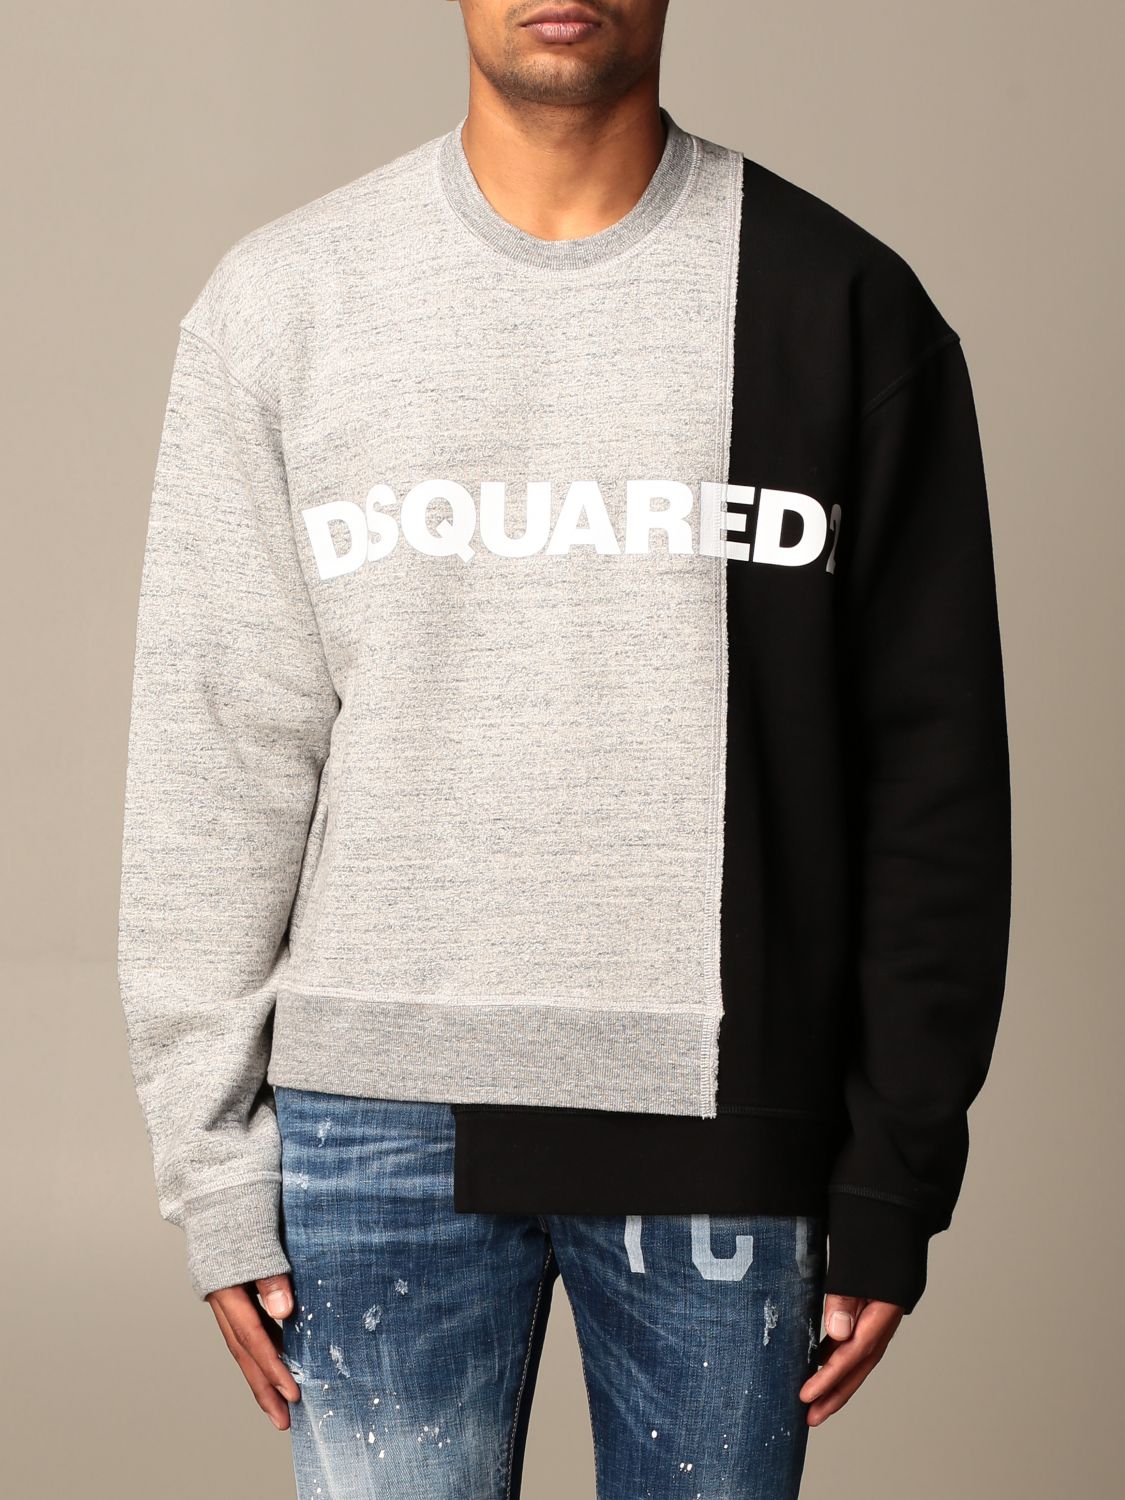 DSQUARED2: sweatshirt in bicolor cotton with logo - White 